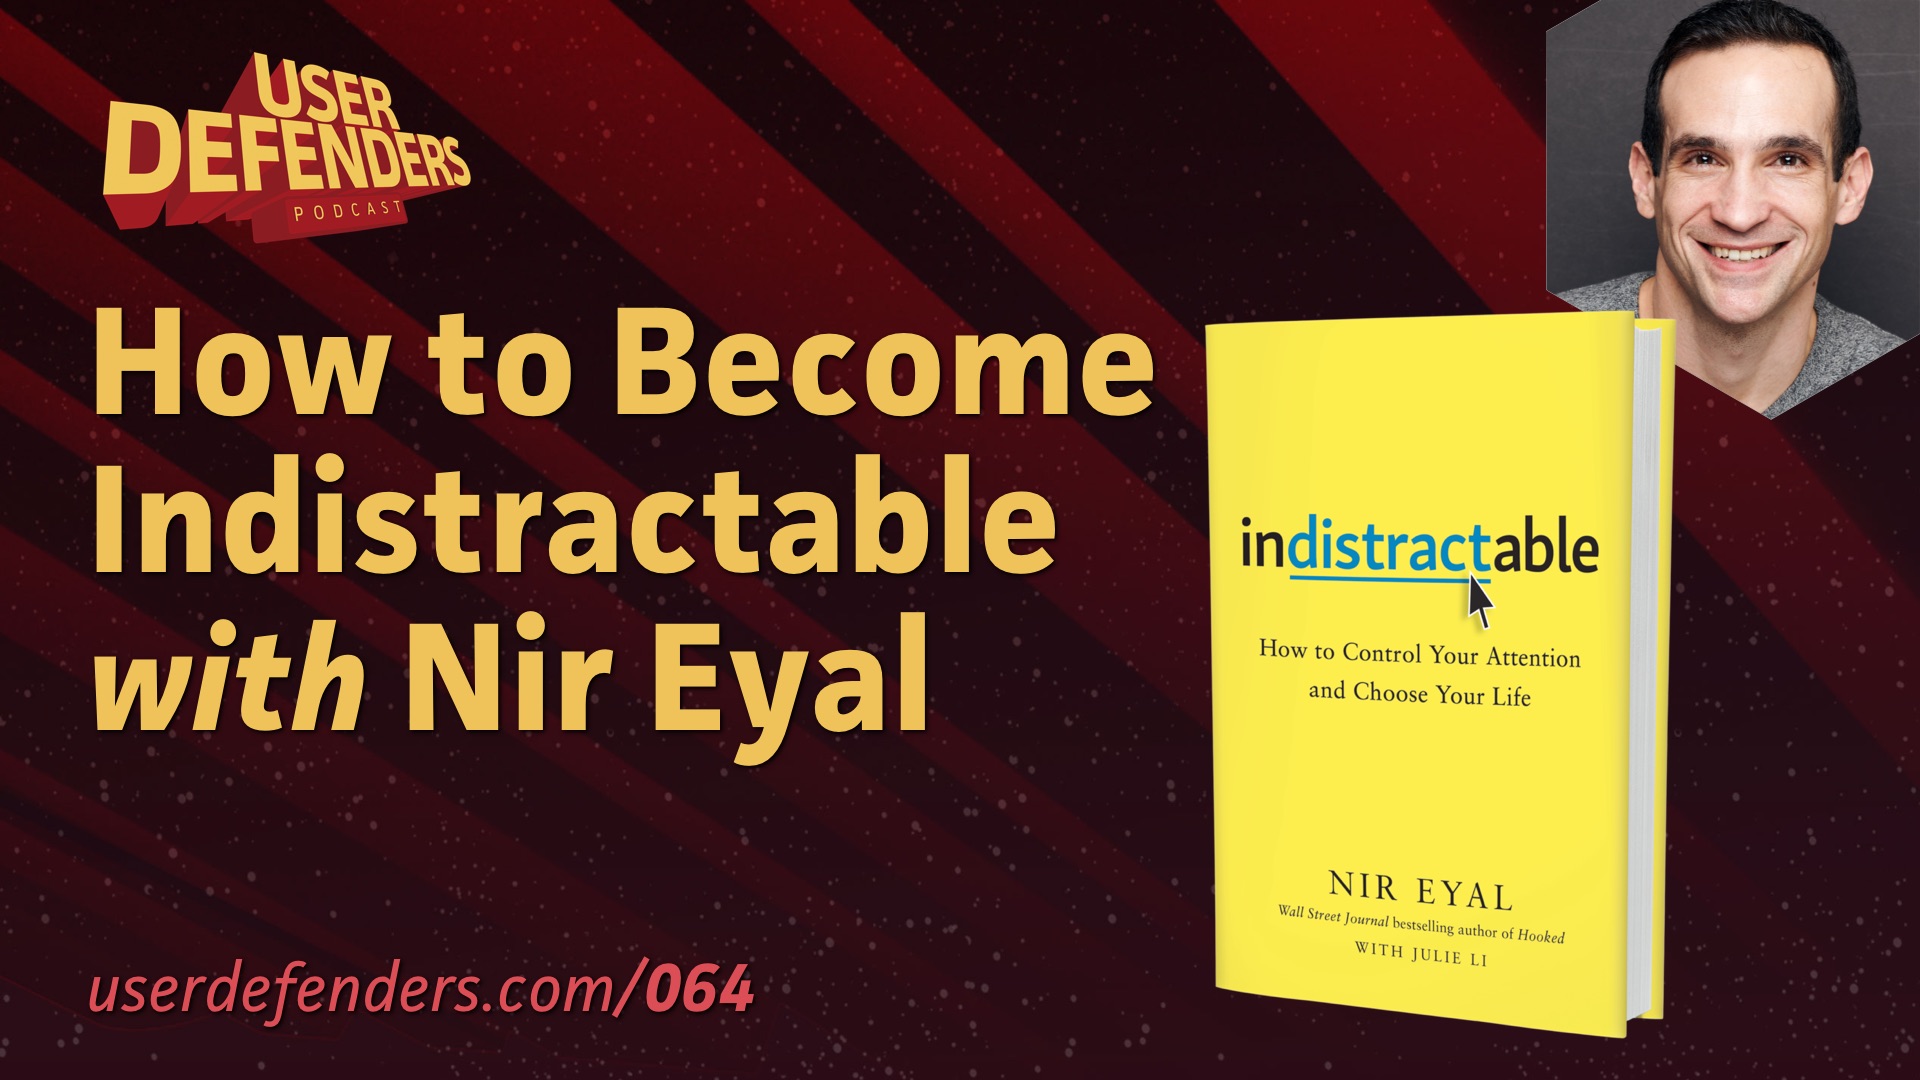 How to Become Indistractable: Nir Eyal on User Defenders: Podcast